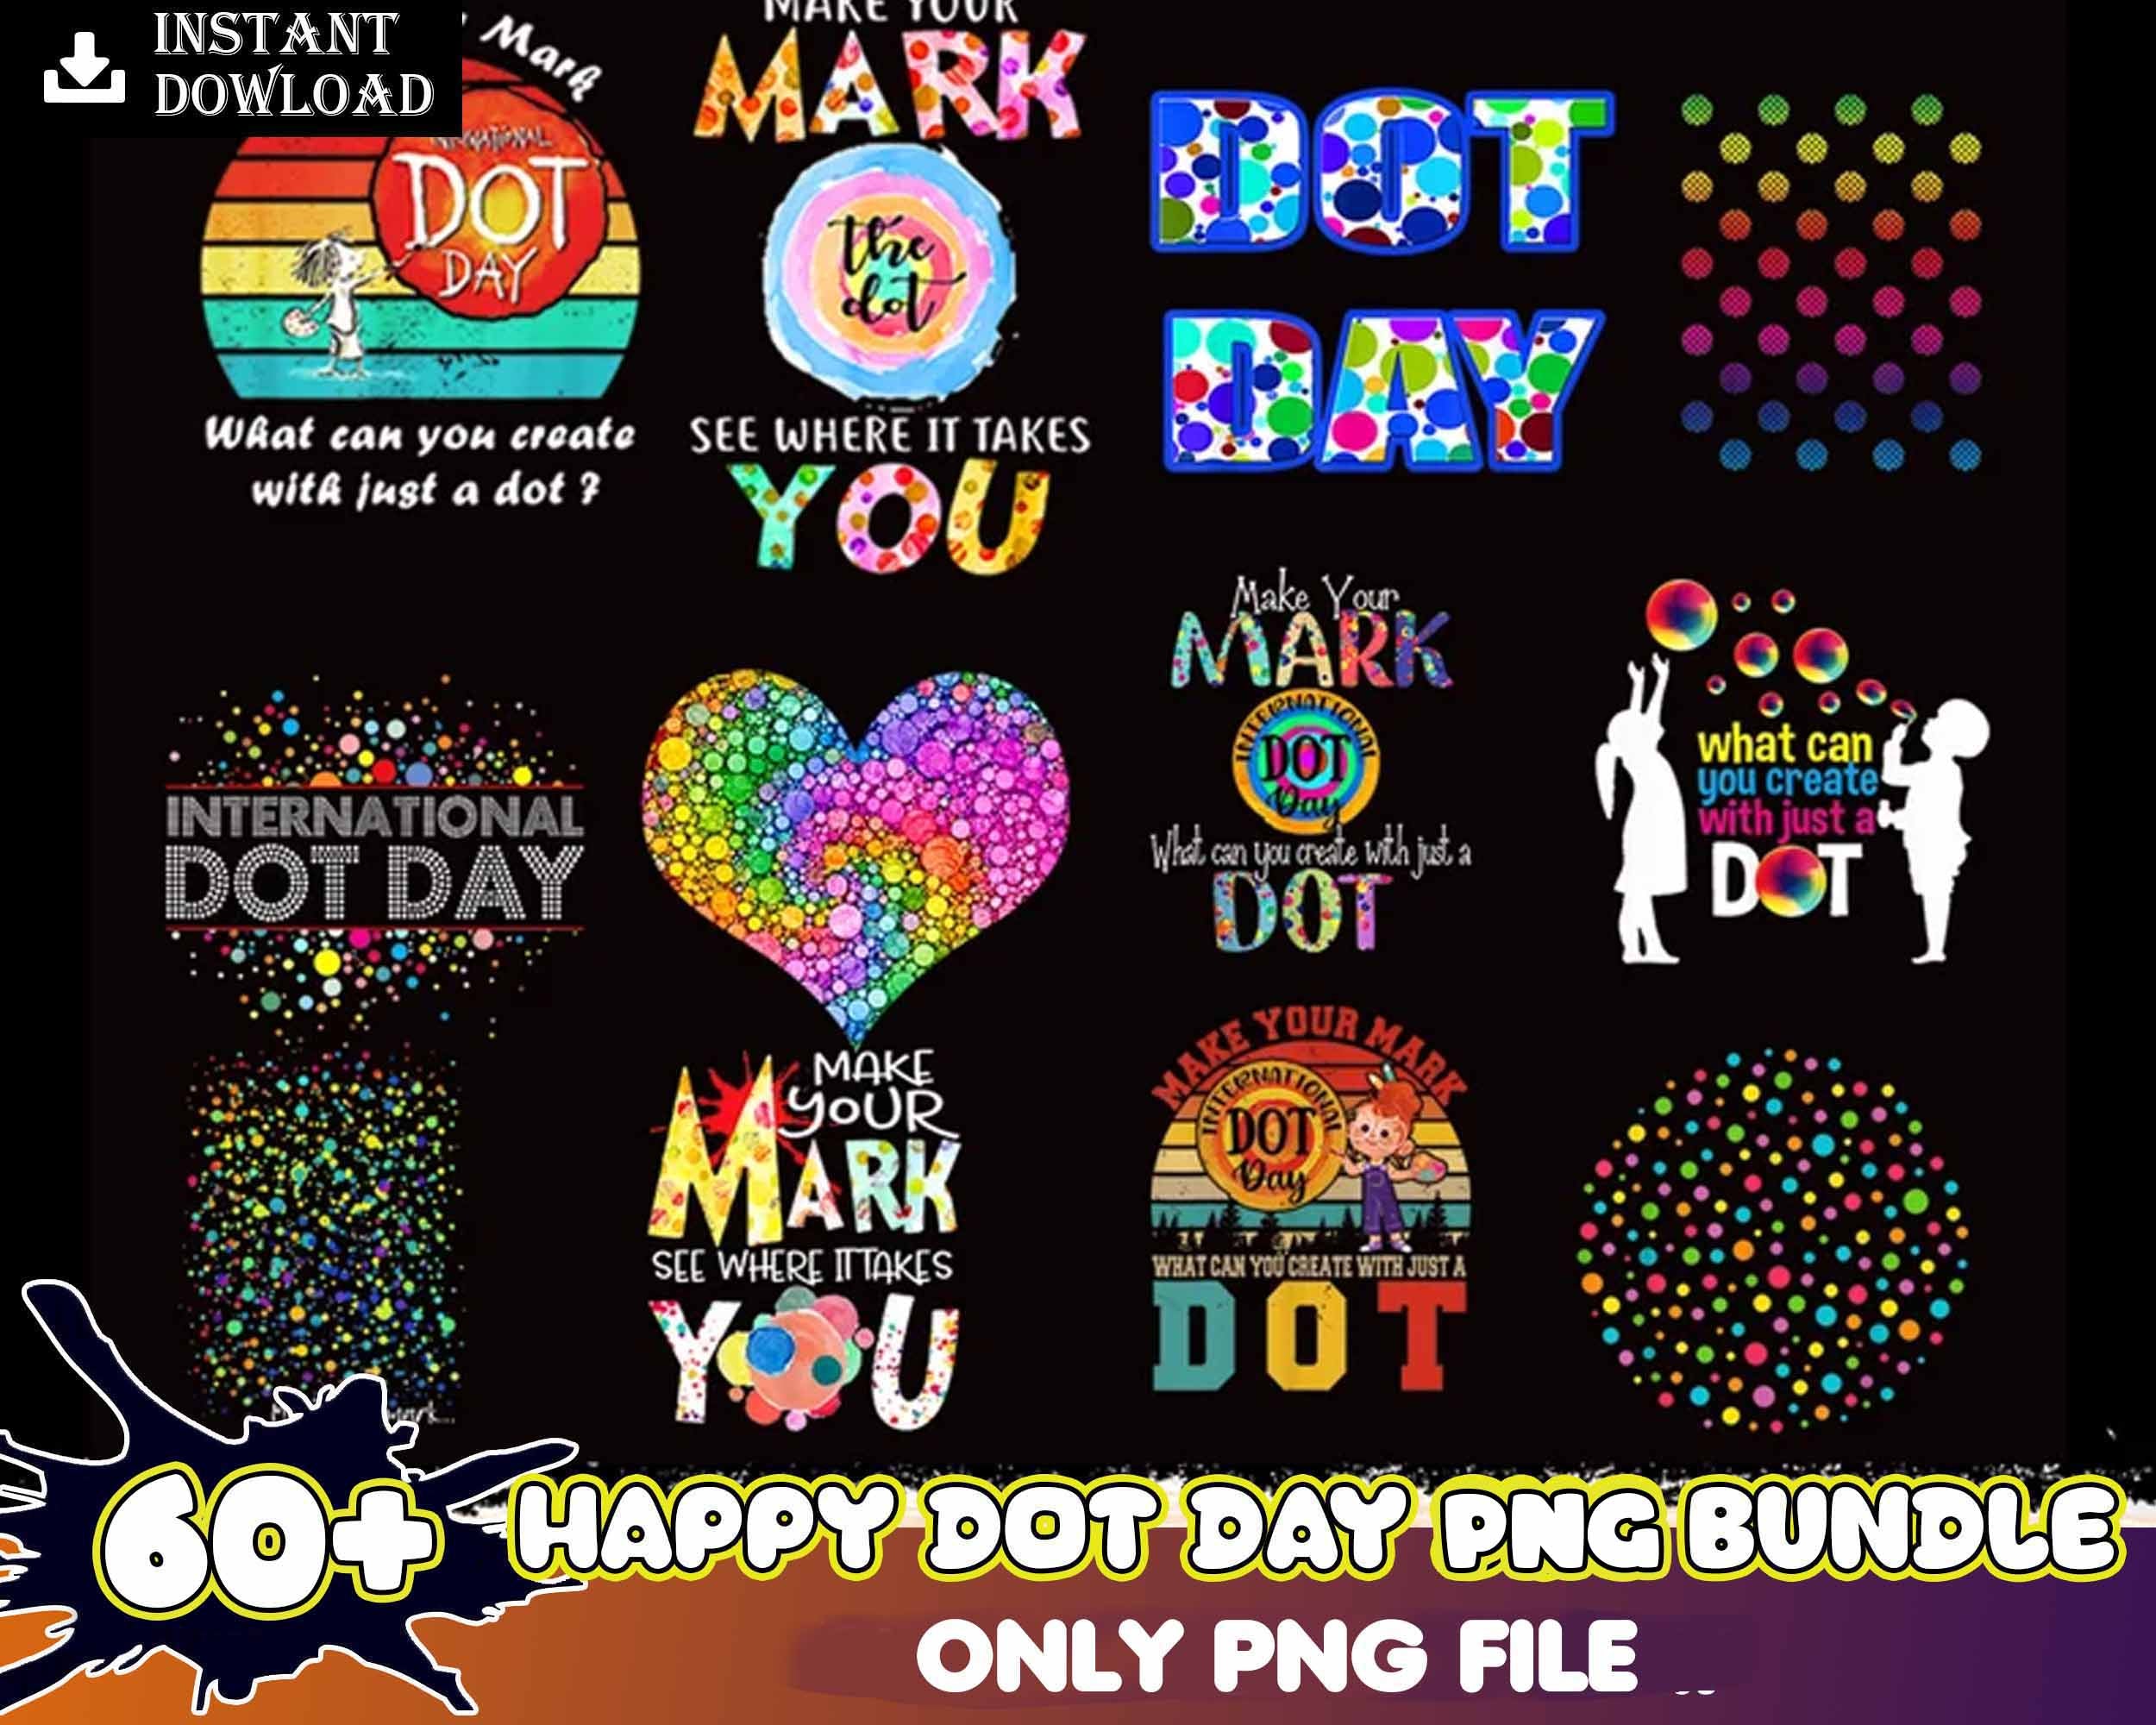 60+ Happy Dot Day PNG, Make Your Mark And See Where It Takes You, September 15th png, Make You Mark Png, Dot Day Sublimations